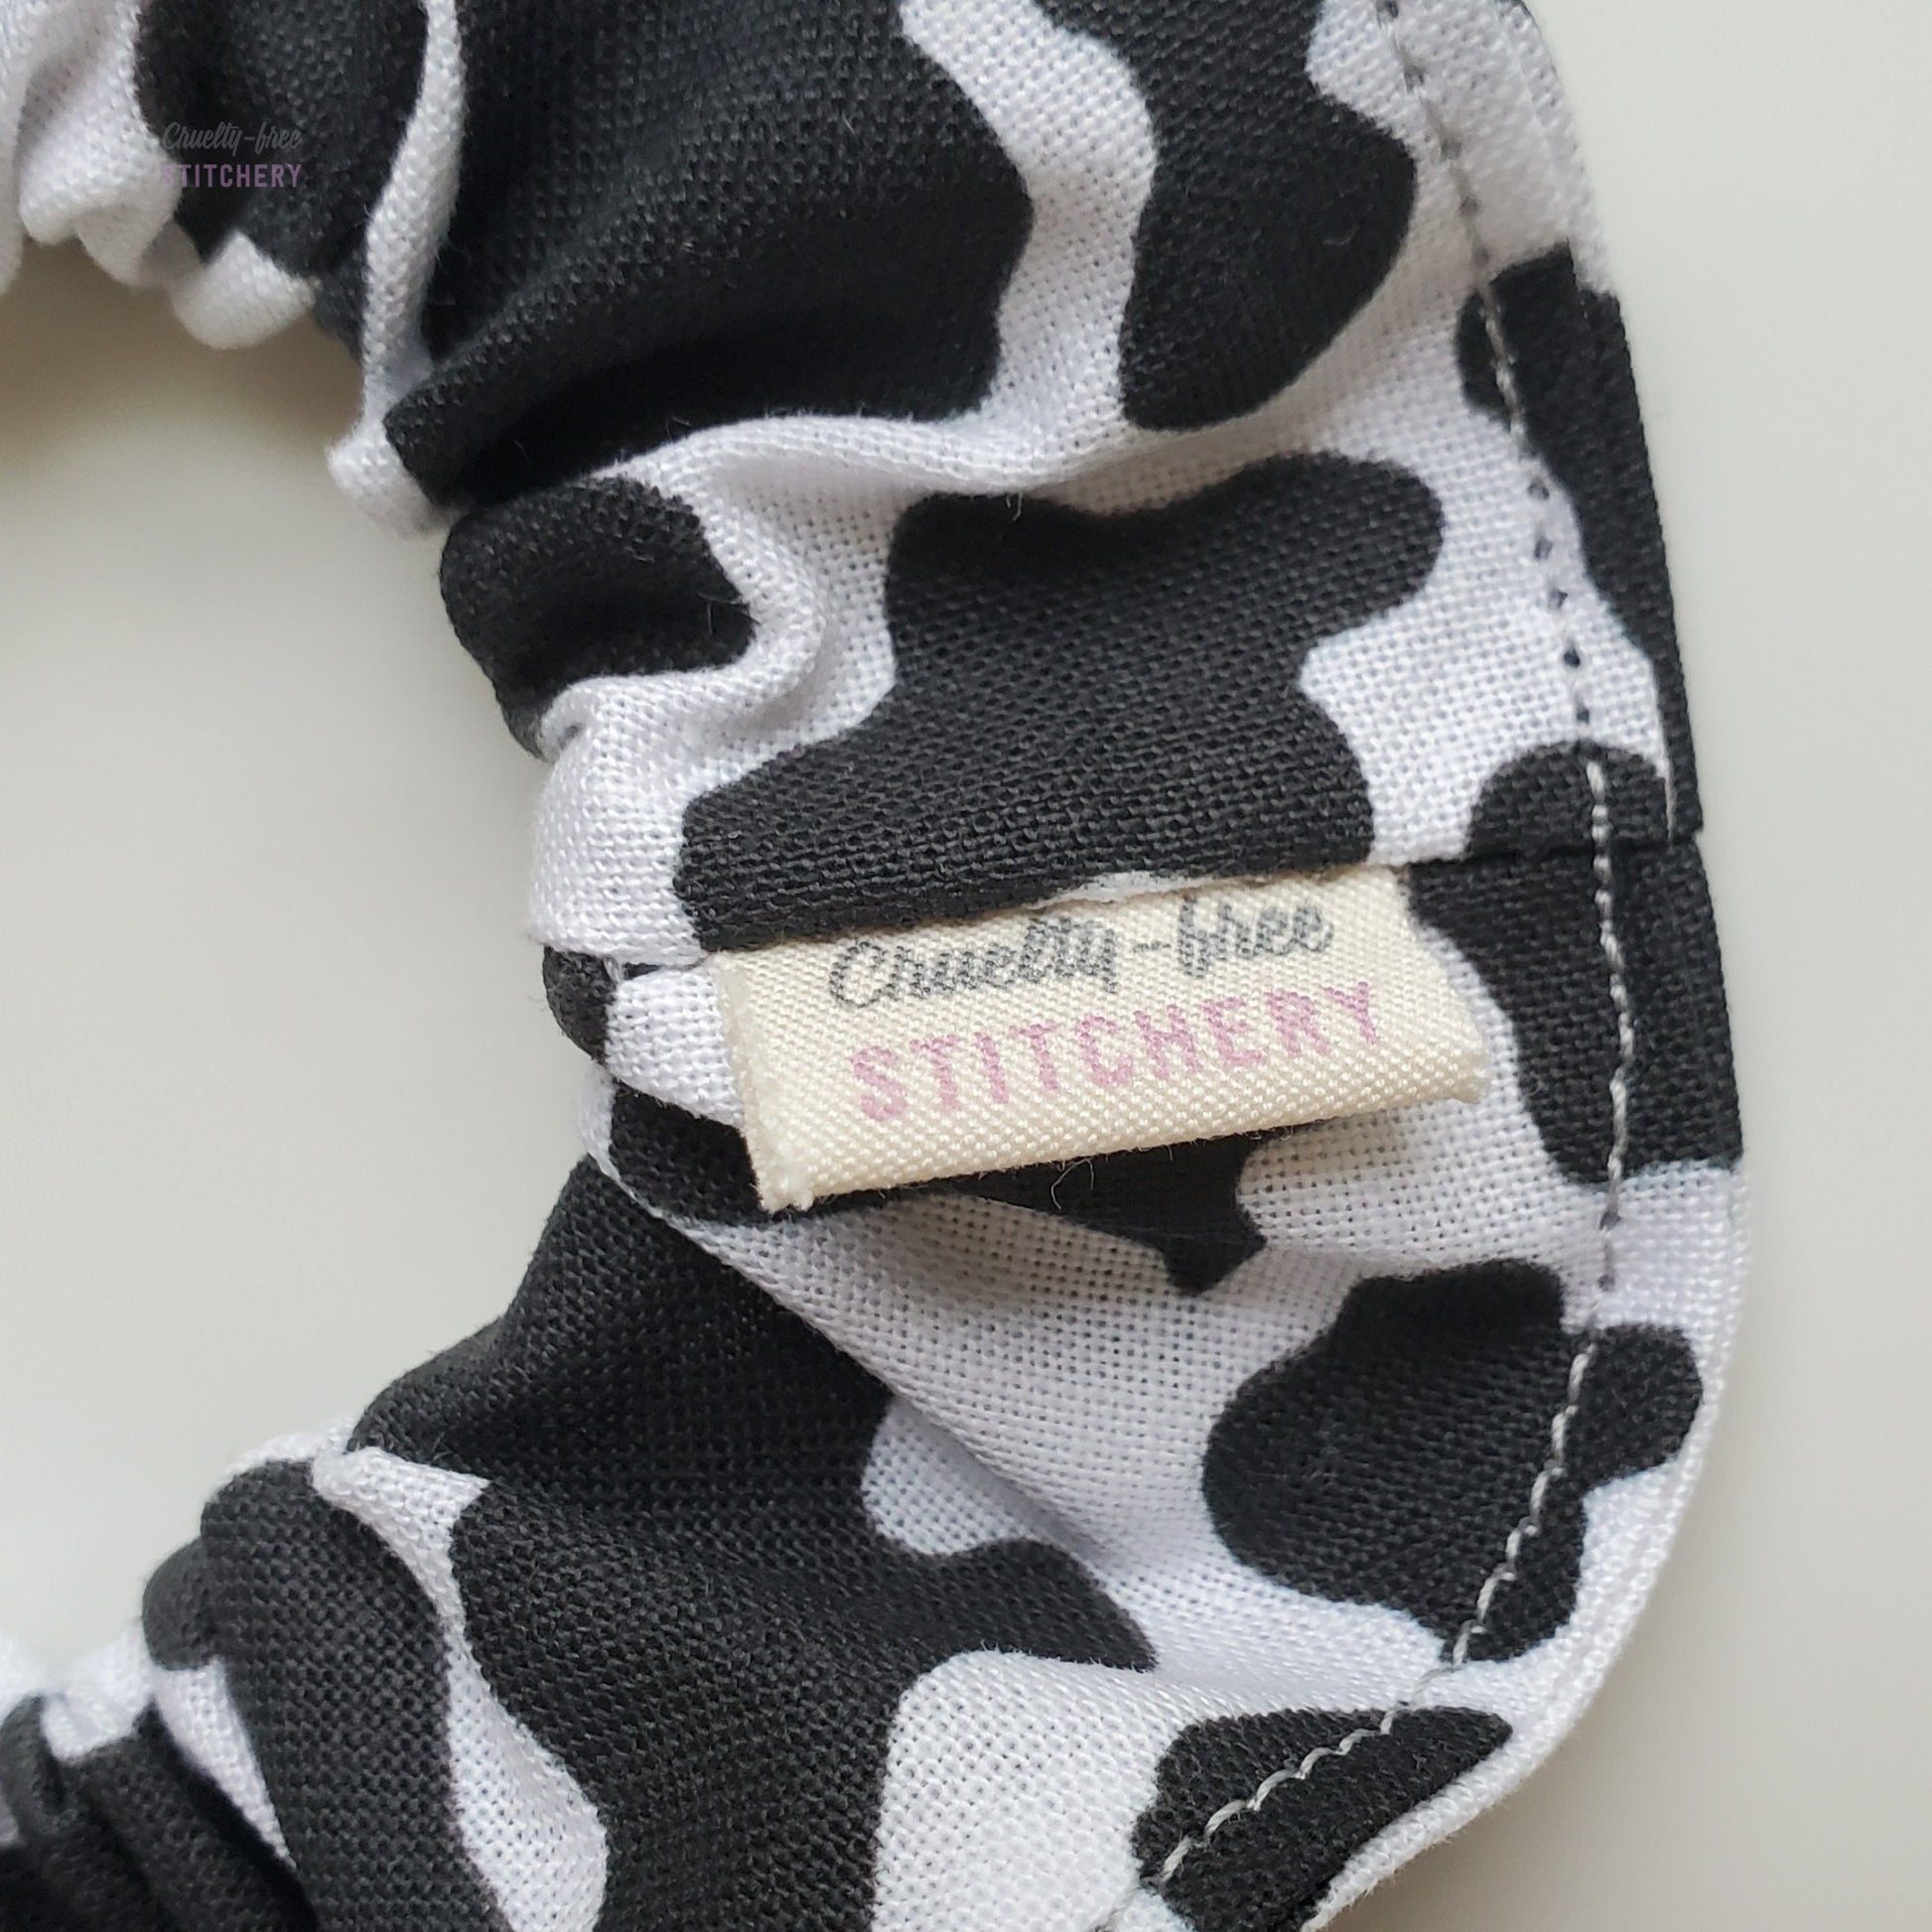 Close-up of the cow print scrunchie with a small white tag with the Cruelty-Free Stitchery logo.